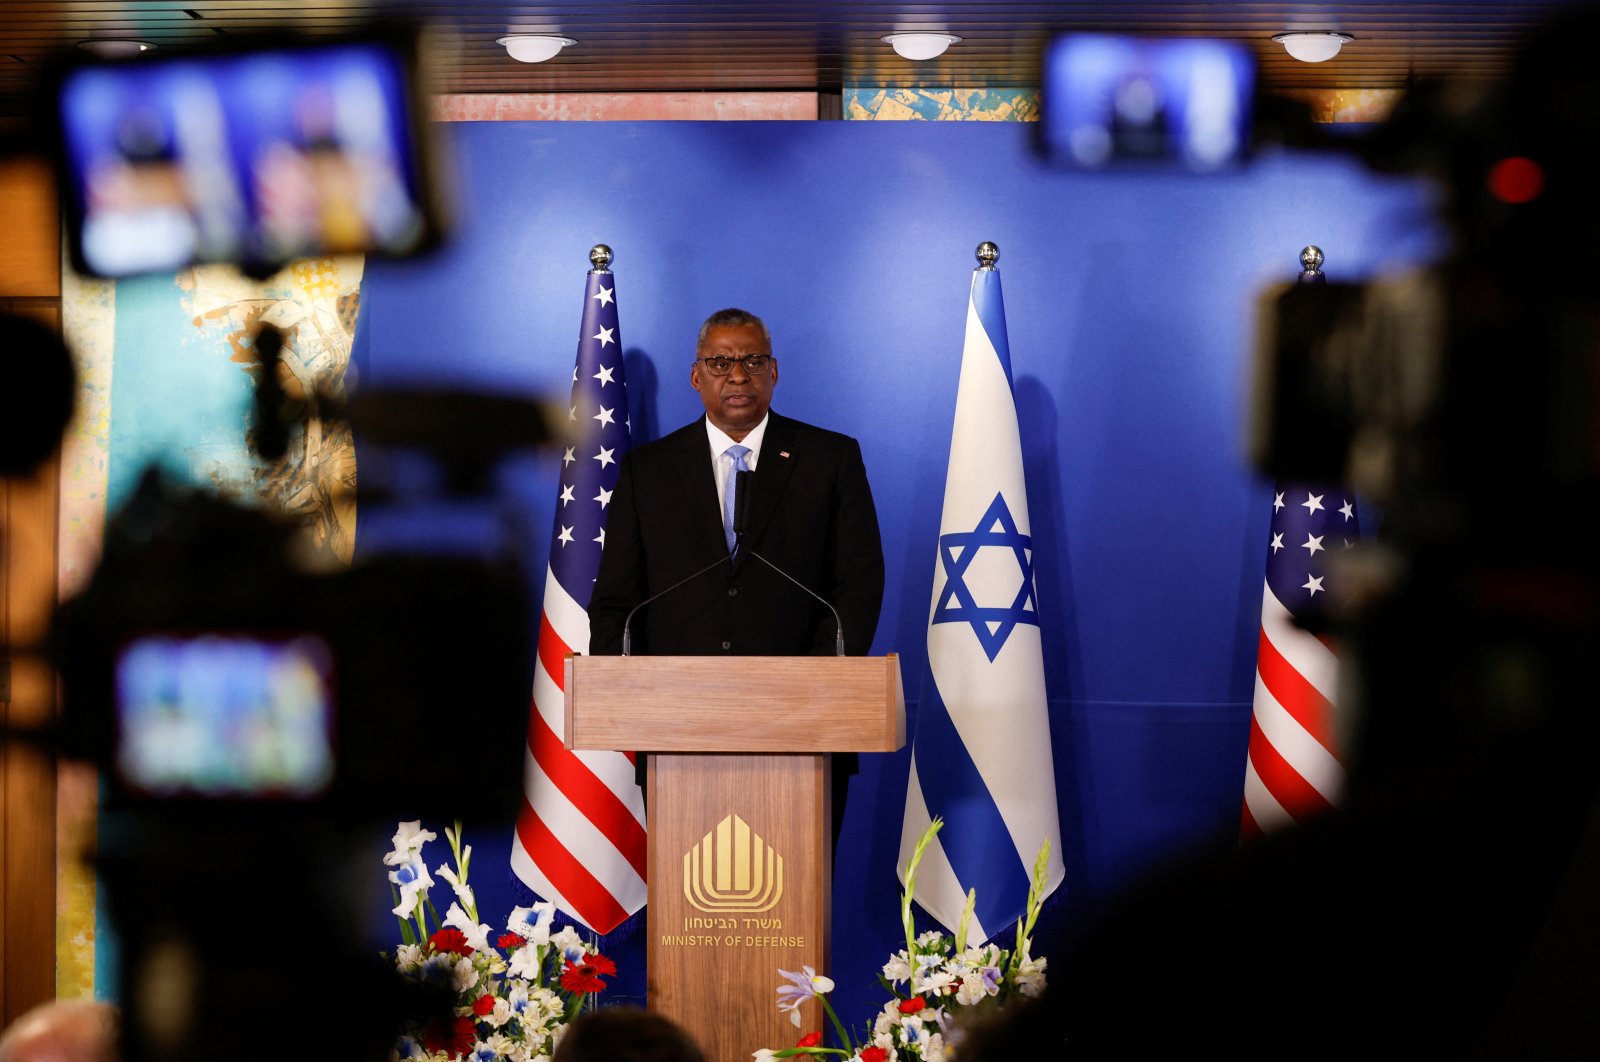 U.S. Secretary of Defense Lloyd Austin attends a news conference with Israeli Defense Minister Yoav Gallant at Ben Gurion Airport in Lod, Israel, March 9, 2023. (Reuters Photo)